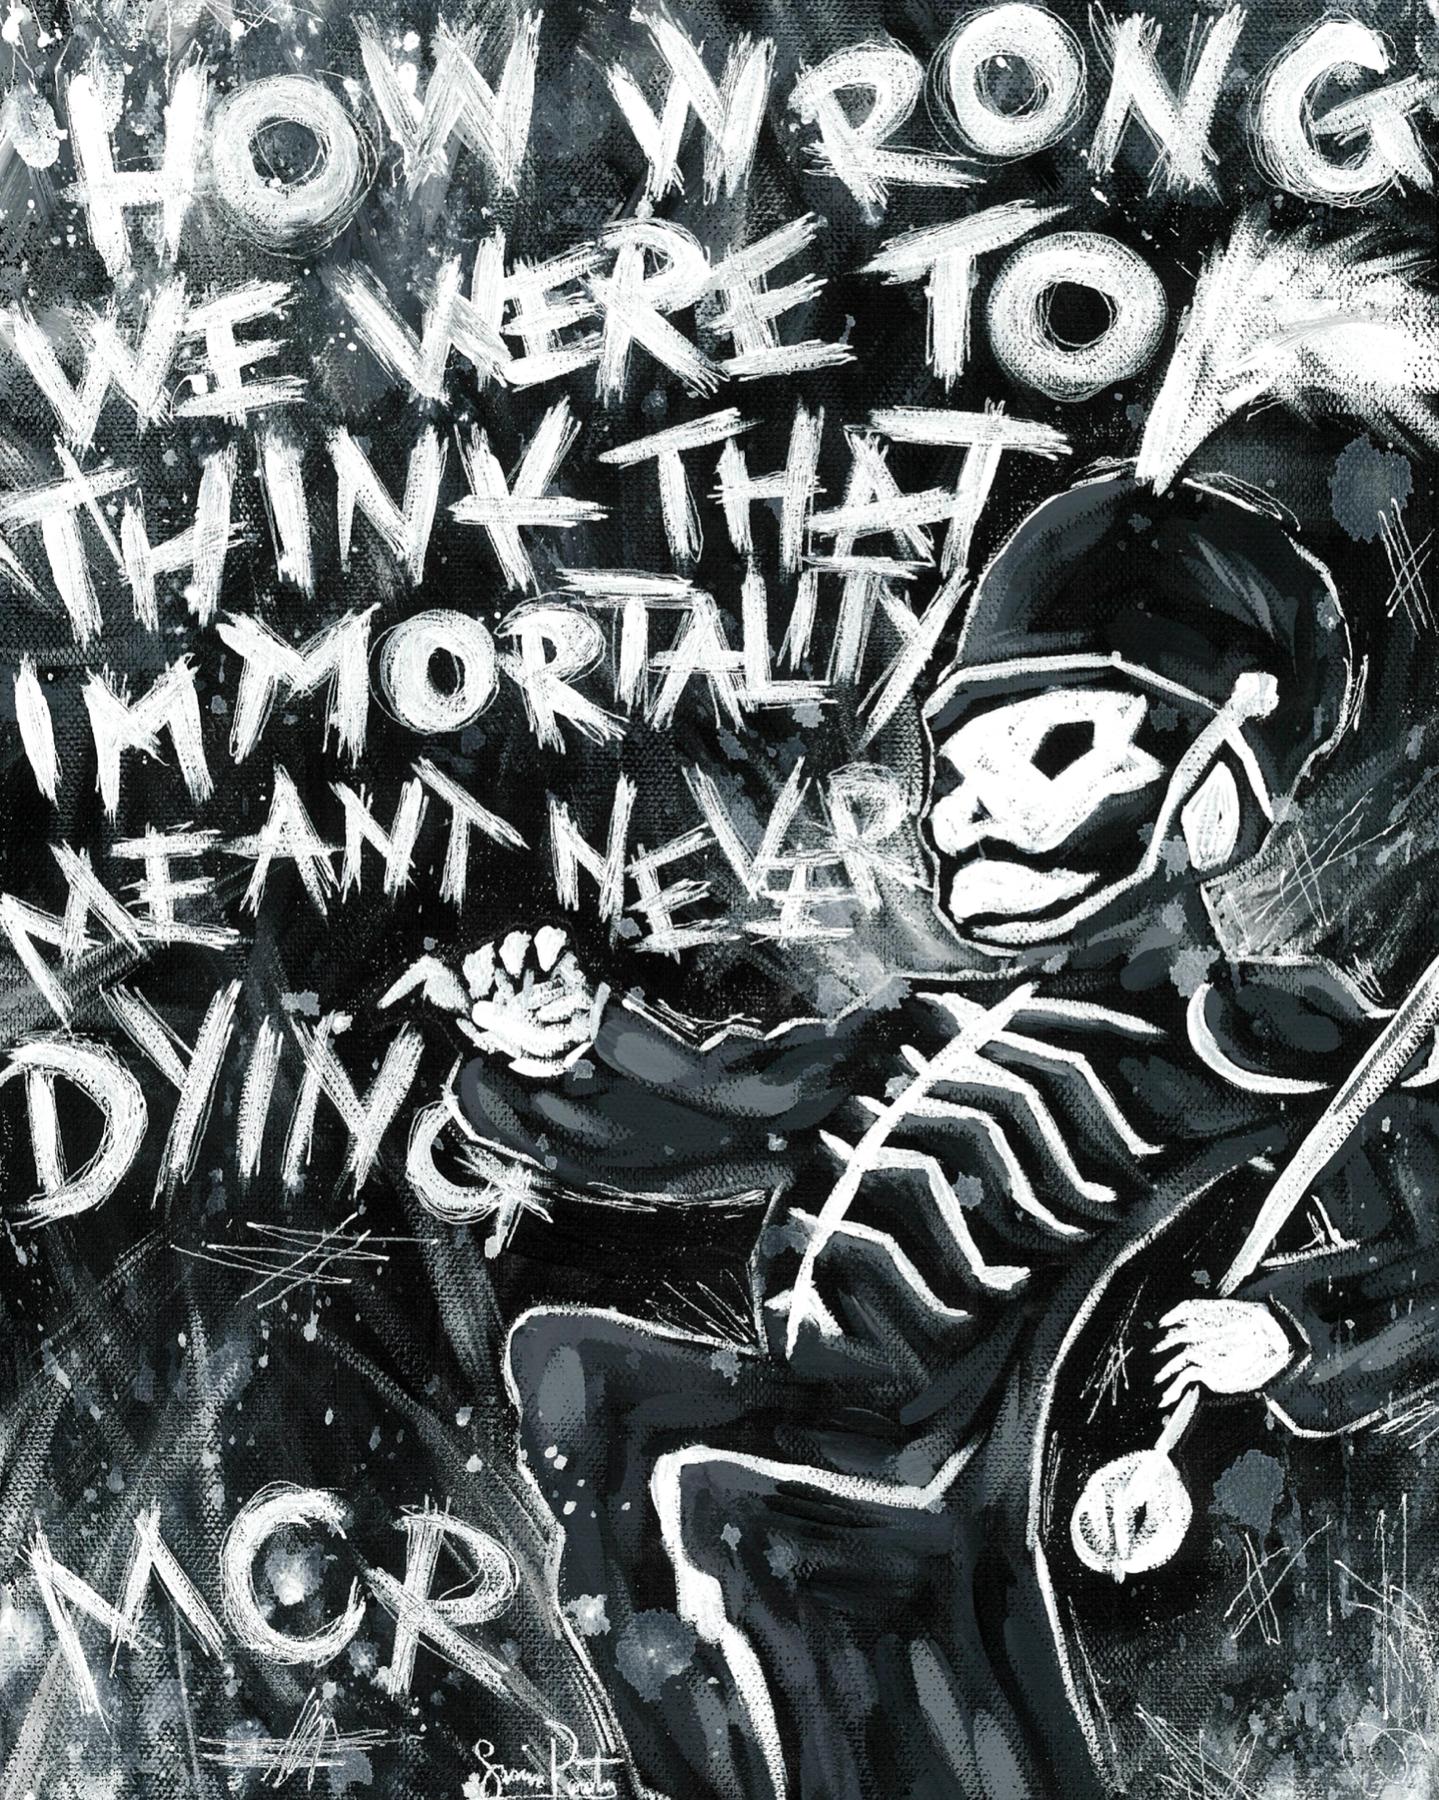 here’s a painting i made bc pc decided to delete all of my collages for no reason🤩 the quote isn’t even from black parade but wtv it’s one of my favorite mcr lines so i used it anyway👍 comments!